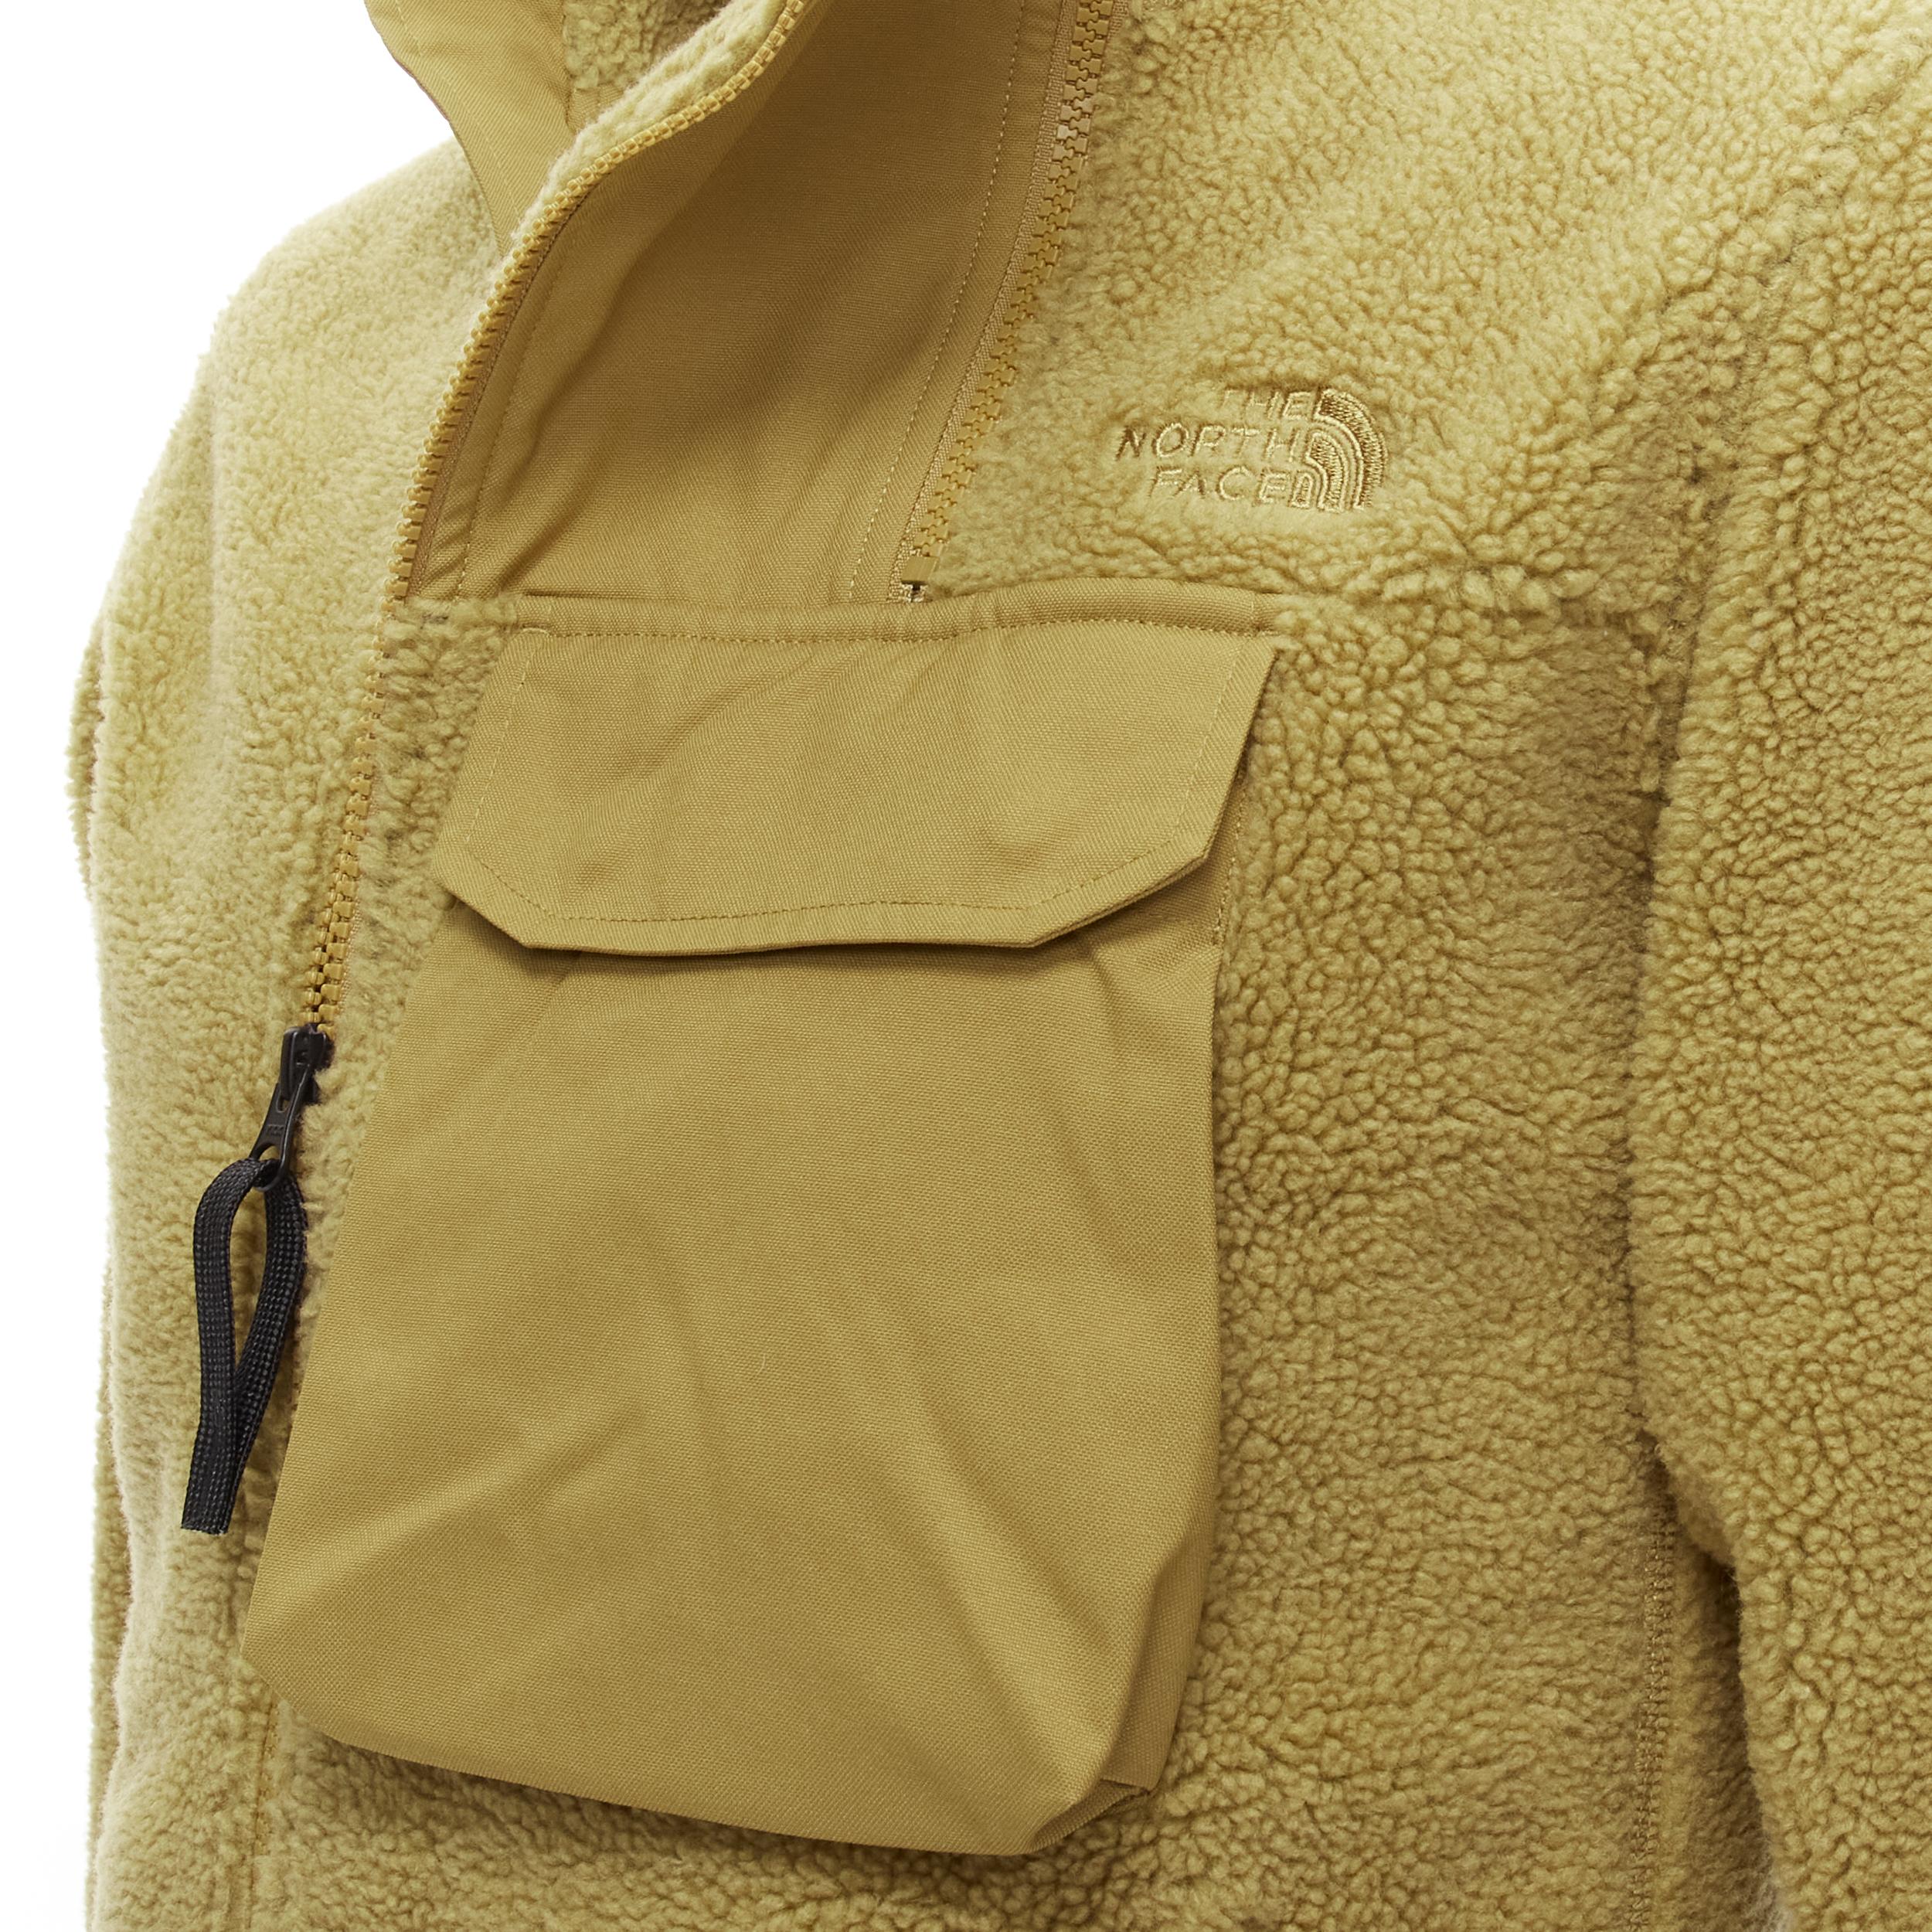 NORTH FACE tan brown fleece patch flap pocket asymmetric zip up jacket XS S 
Reference: CRTI/A00538 
Brand: The North Face 
Material: Fleece 
Color: Brown 
Pattern: Solid 
Closure: Zip 
Extra Detail: US XS / Asia S 
Made in: Cambodia 

CONDITION: